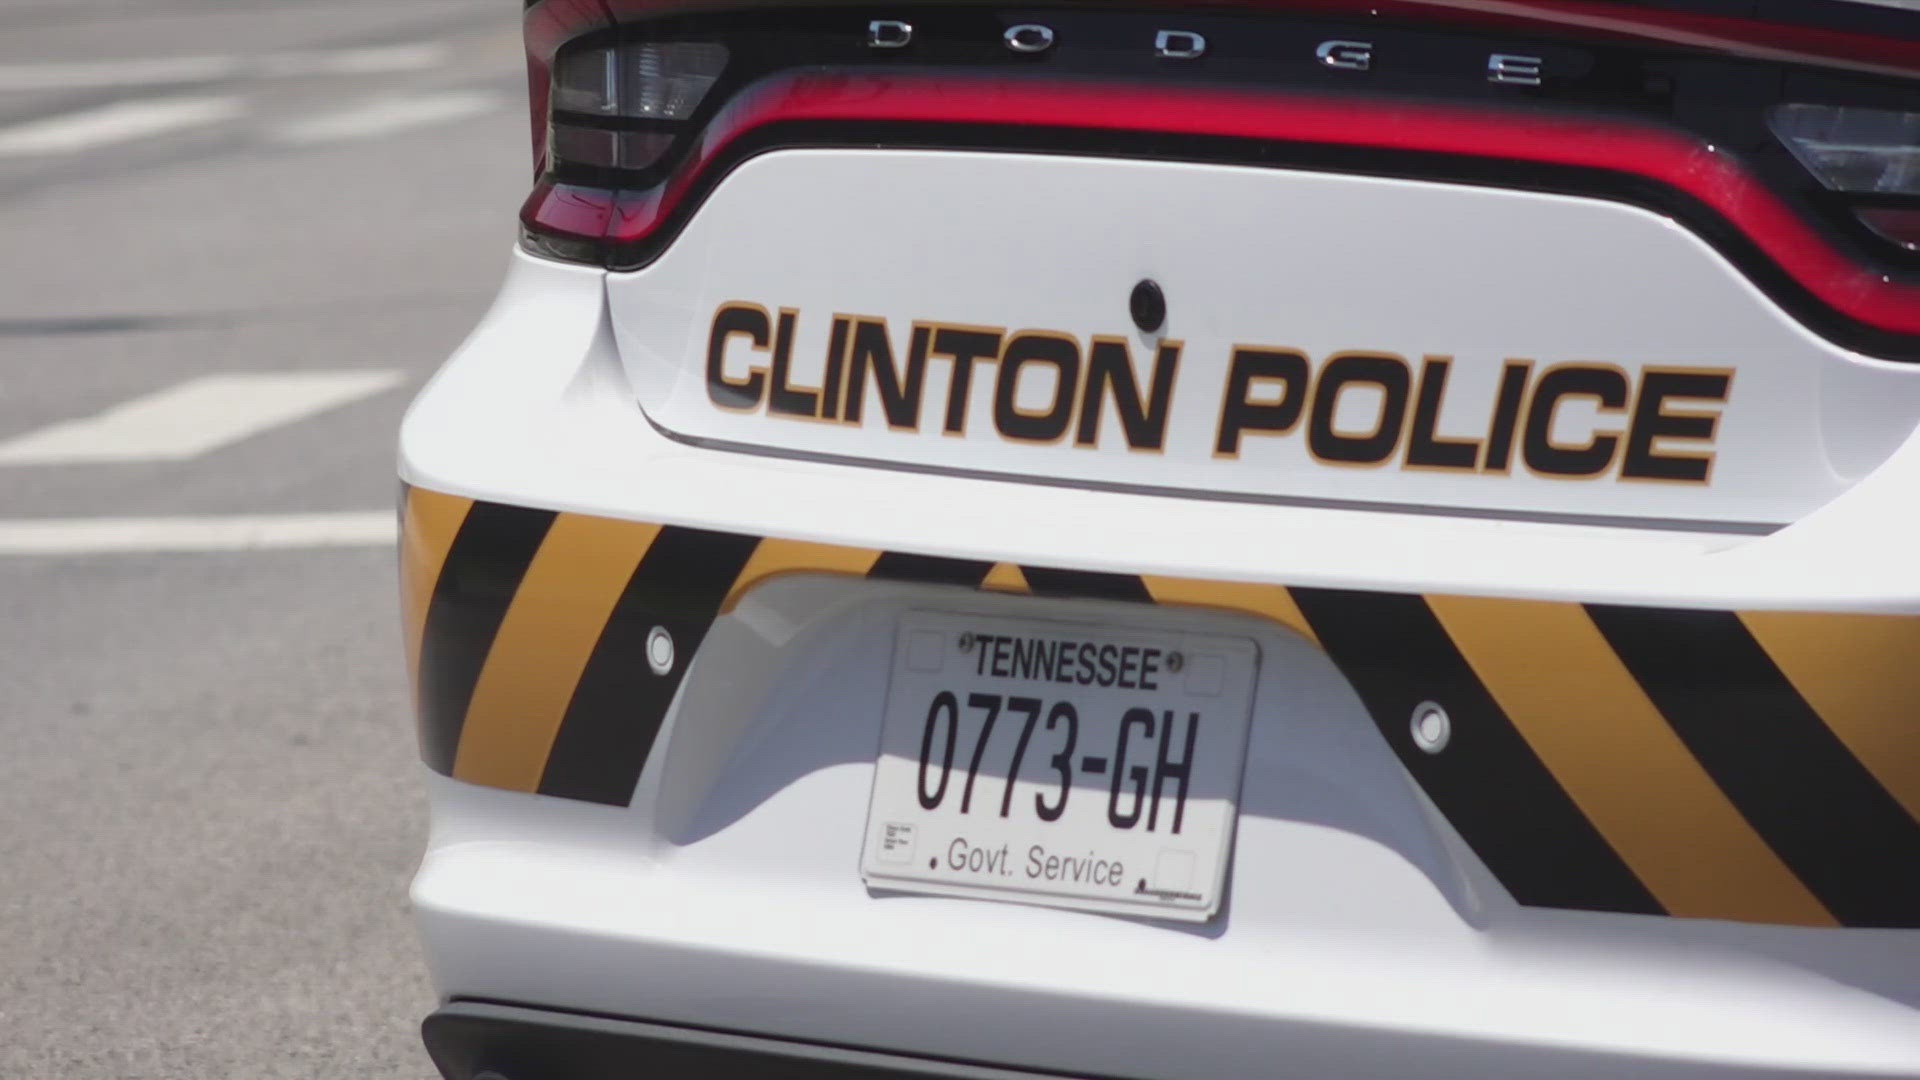 The Clinton Police Department said one of its officers shot and killed a man at an apartment after a call for a "suicidal individual."